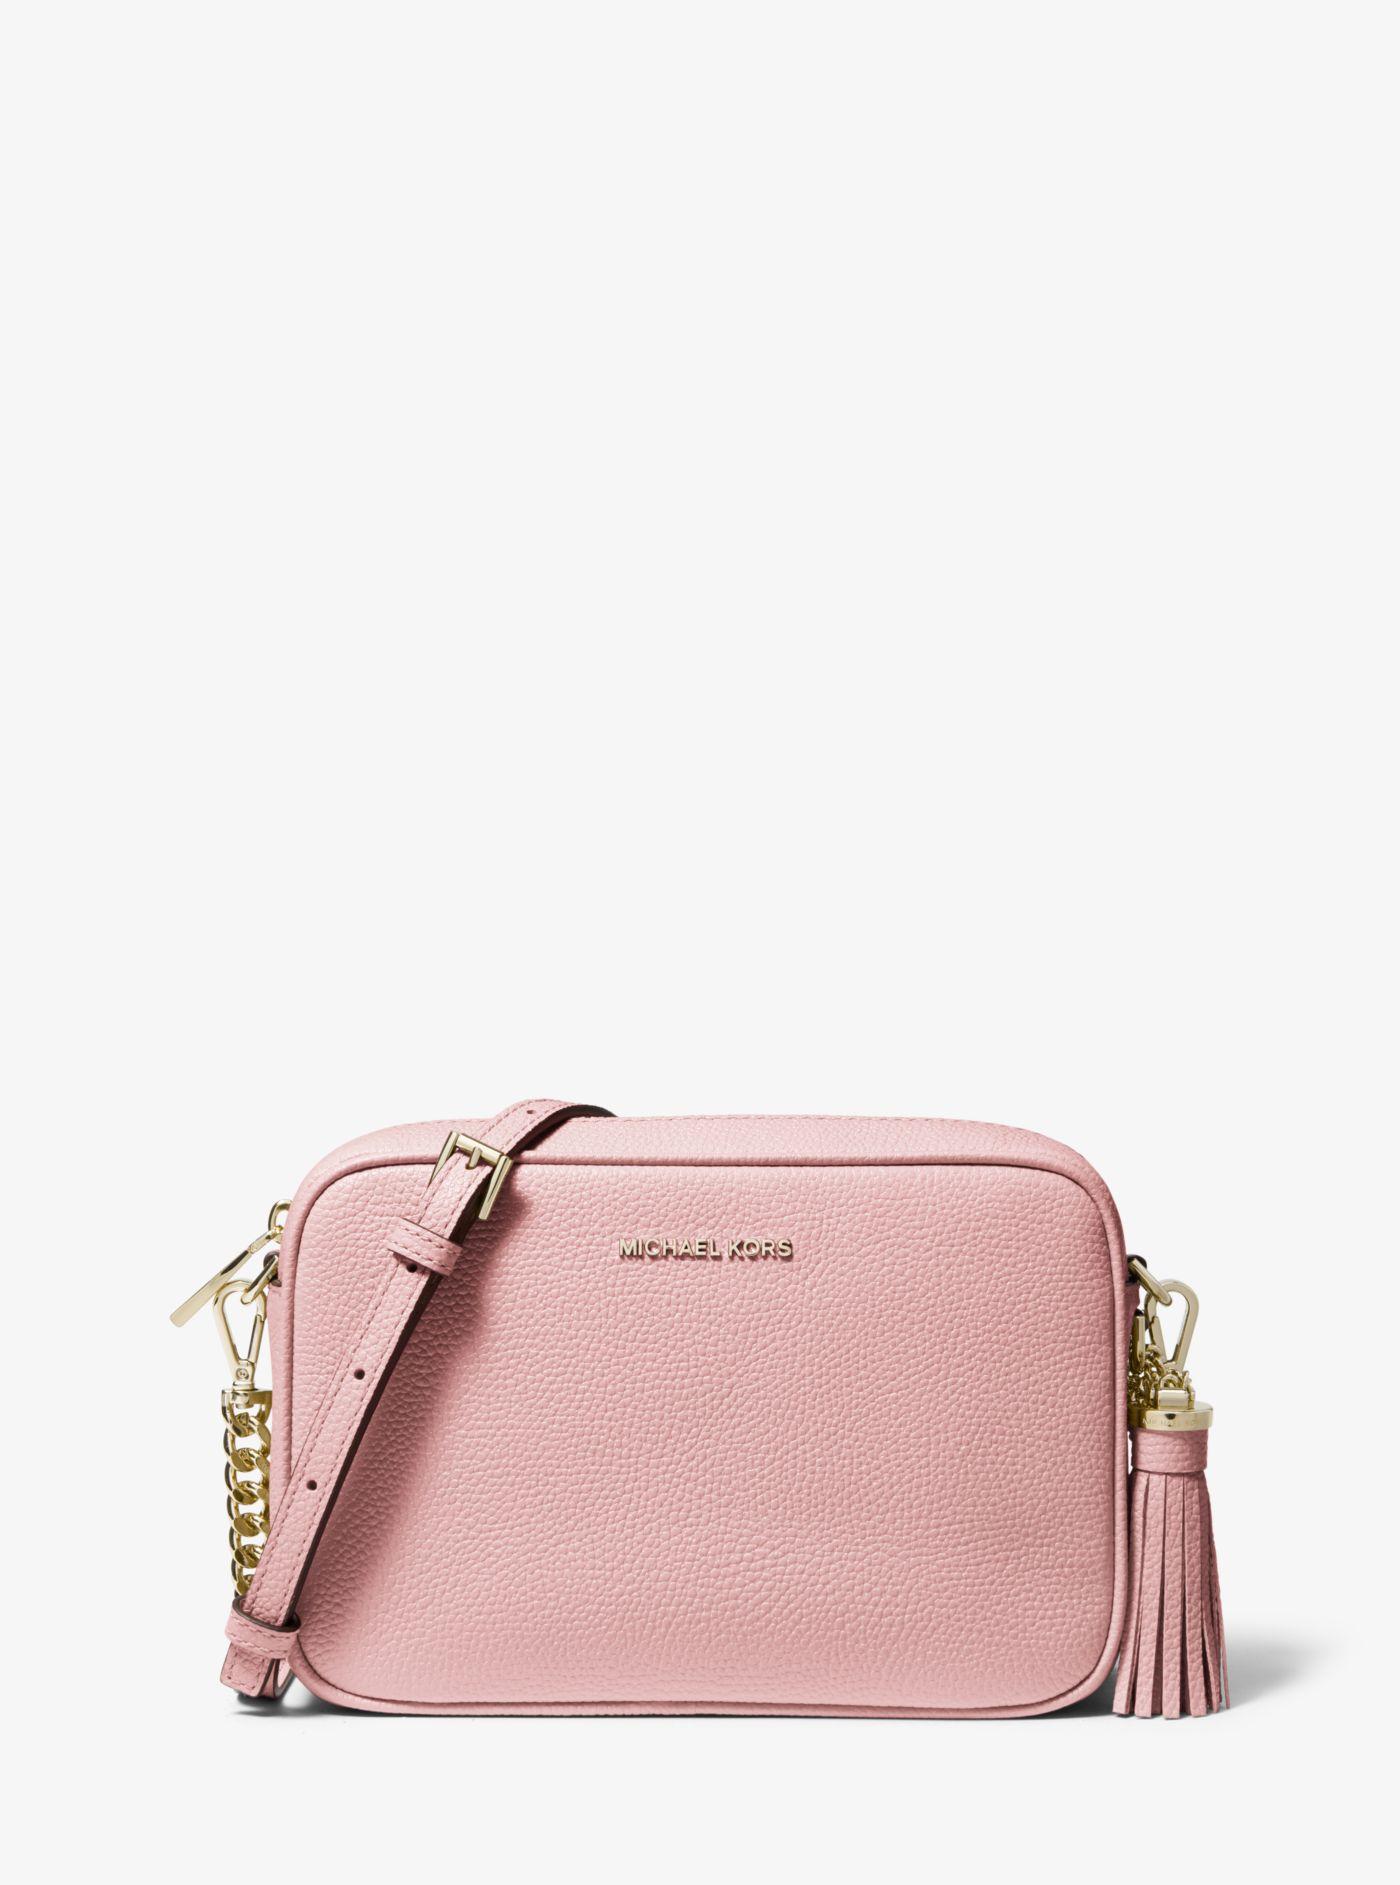 Kors Ginny Medium Pebbled Leather in Pink | Lyst